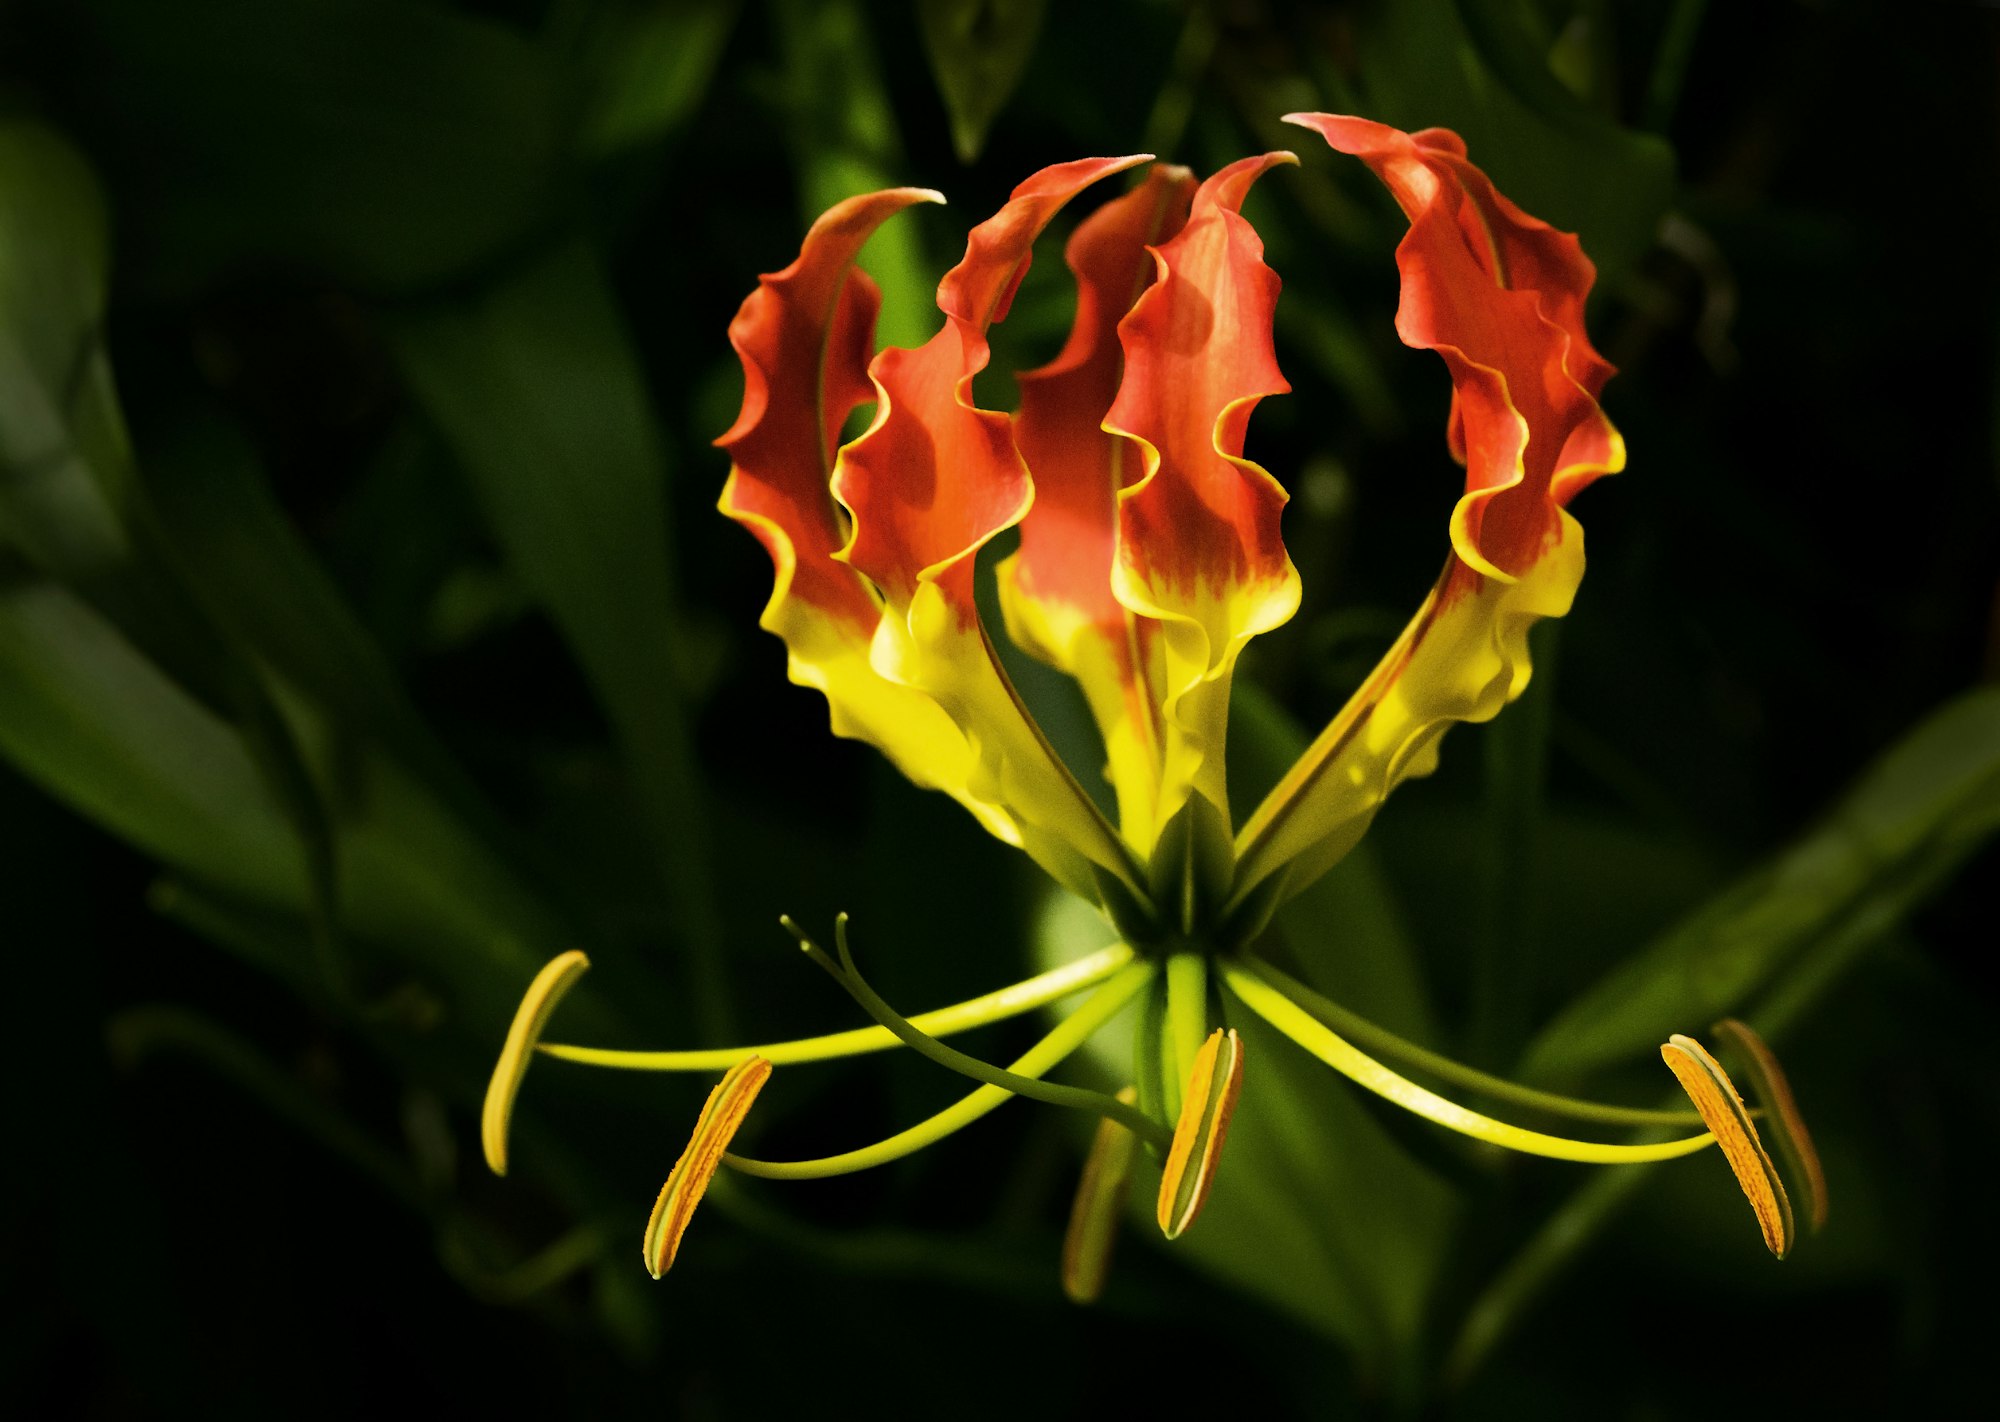 The individual petals of this flower look like flames so it is called a Flame lily. It also has a nice botanical name, Gloriosa superba. The Flame lily is the floral emblem of Zimbabwe.